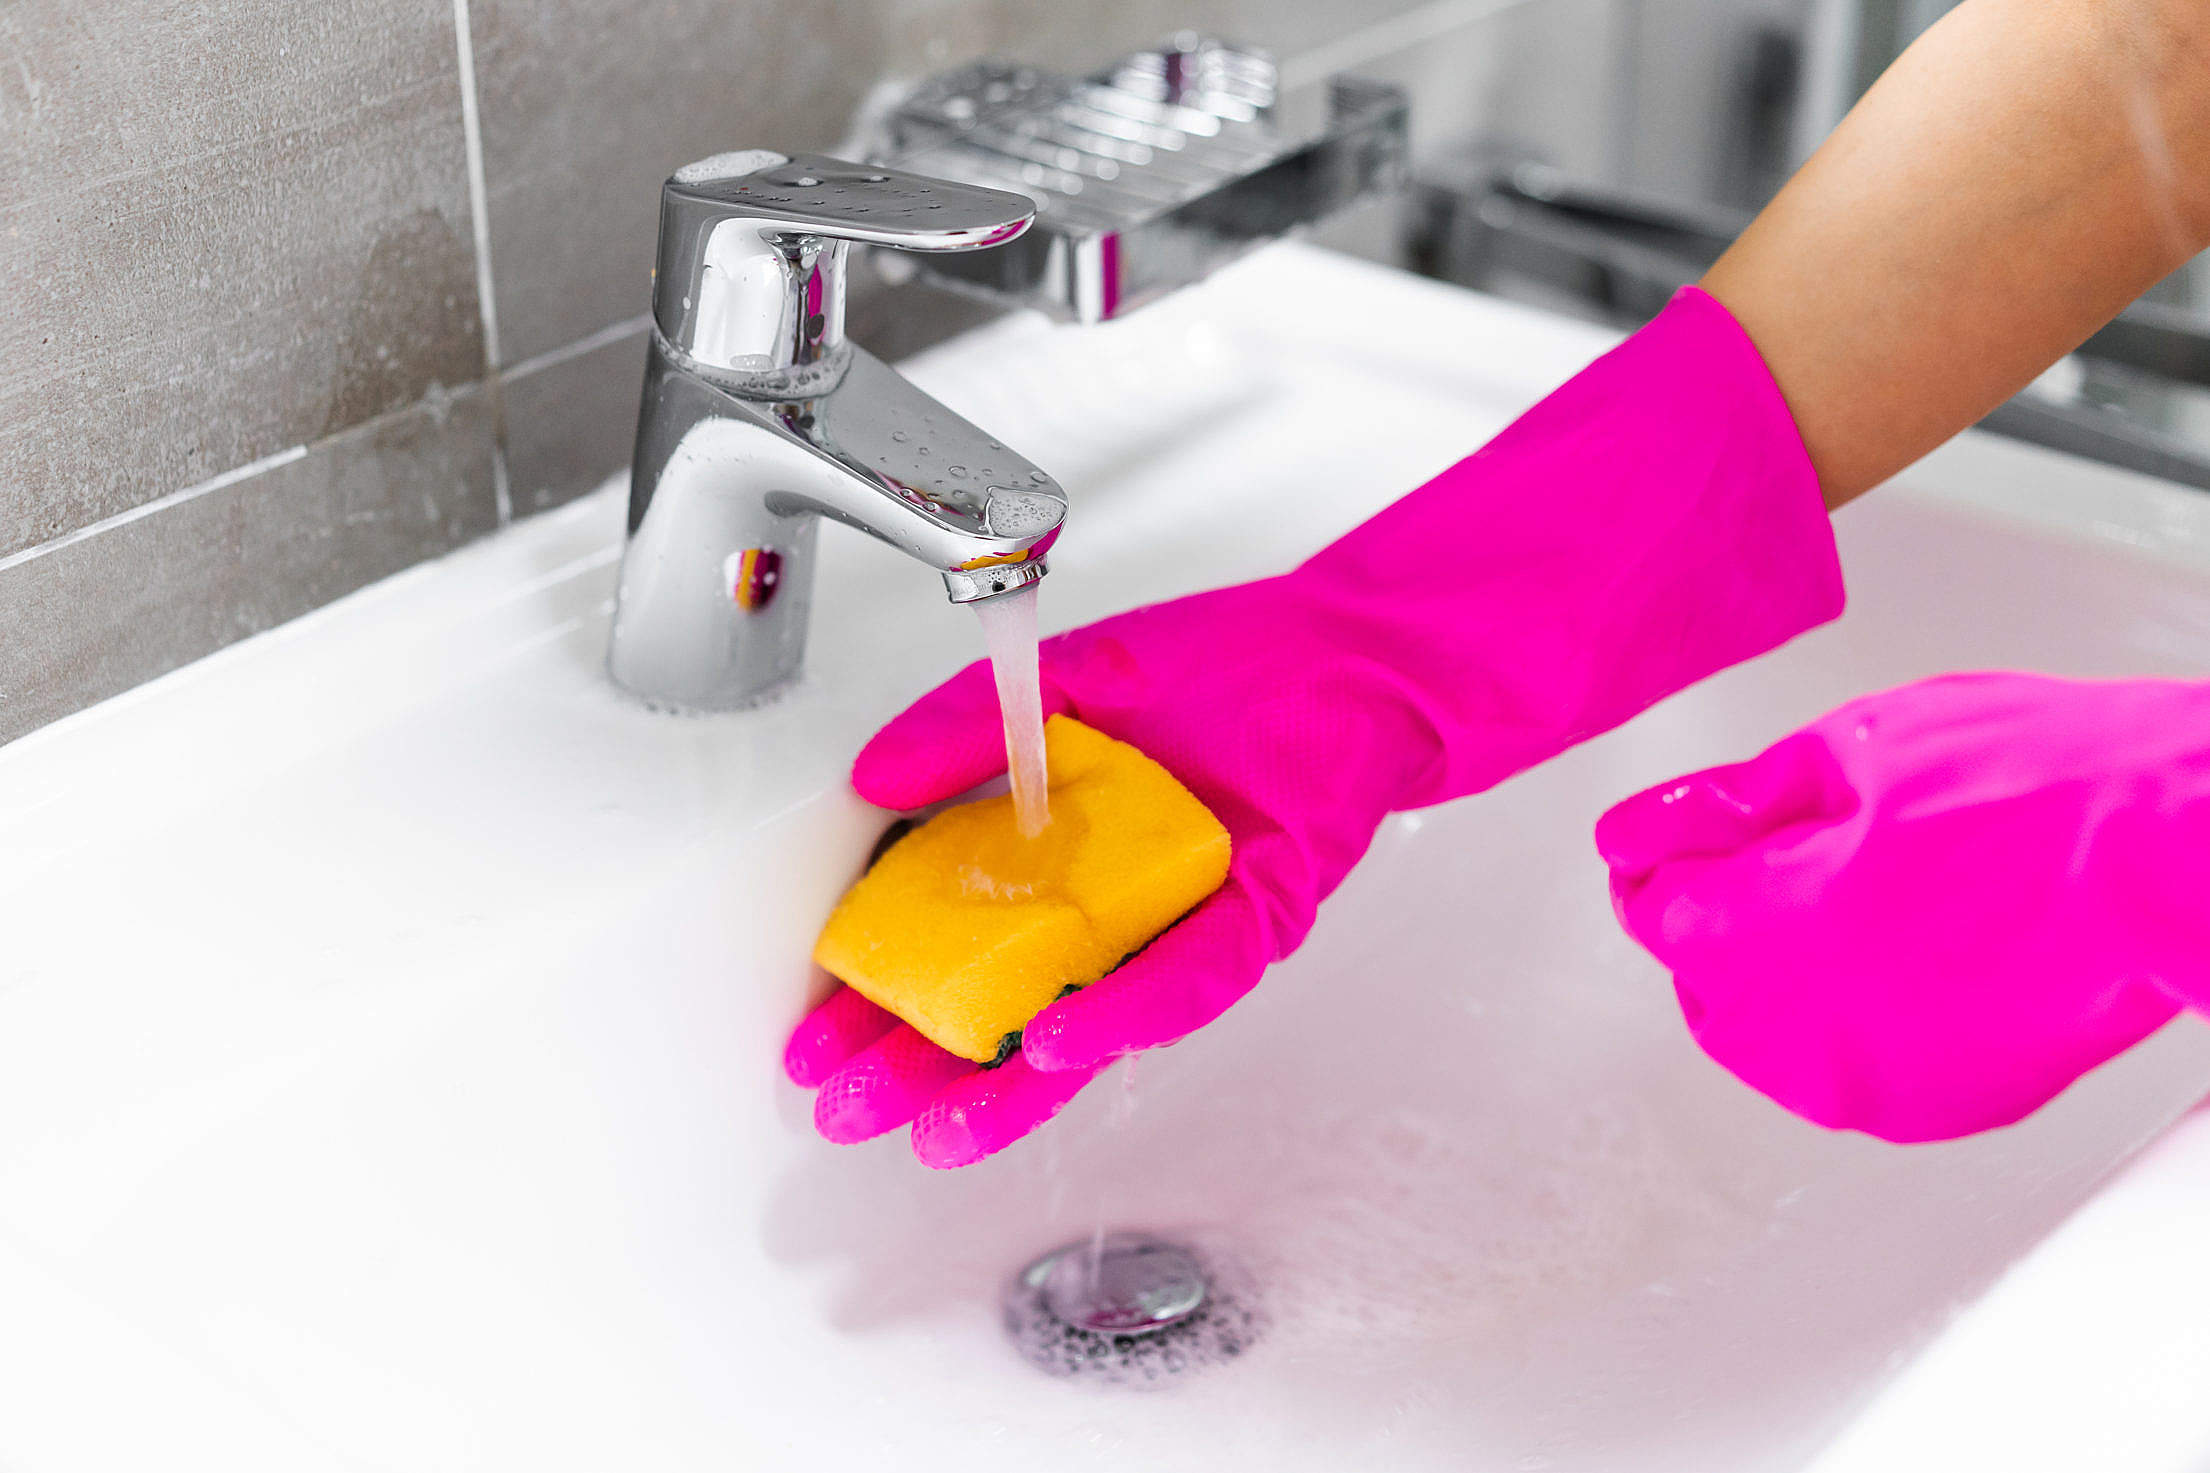 hands-in-pink-gloves-washing-a-washbasin-with-a-sponge.jpg (226 KB)